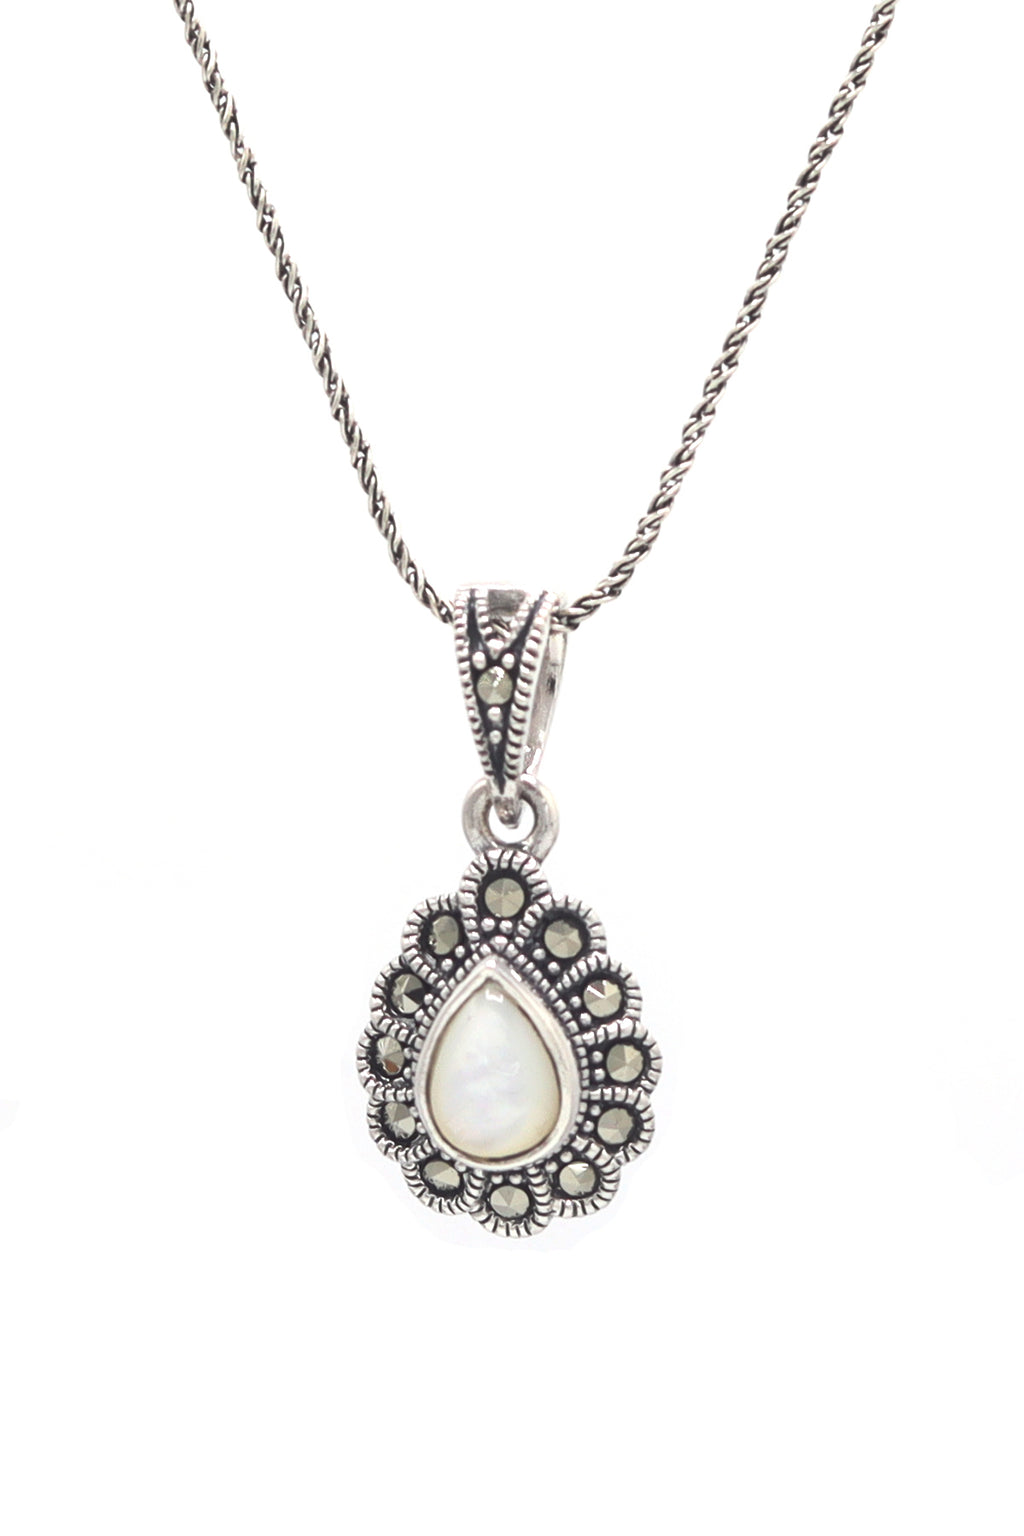 Drop Model Authentic Silver Necklace With Mother of Pearl (NG201021609)